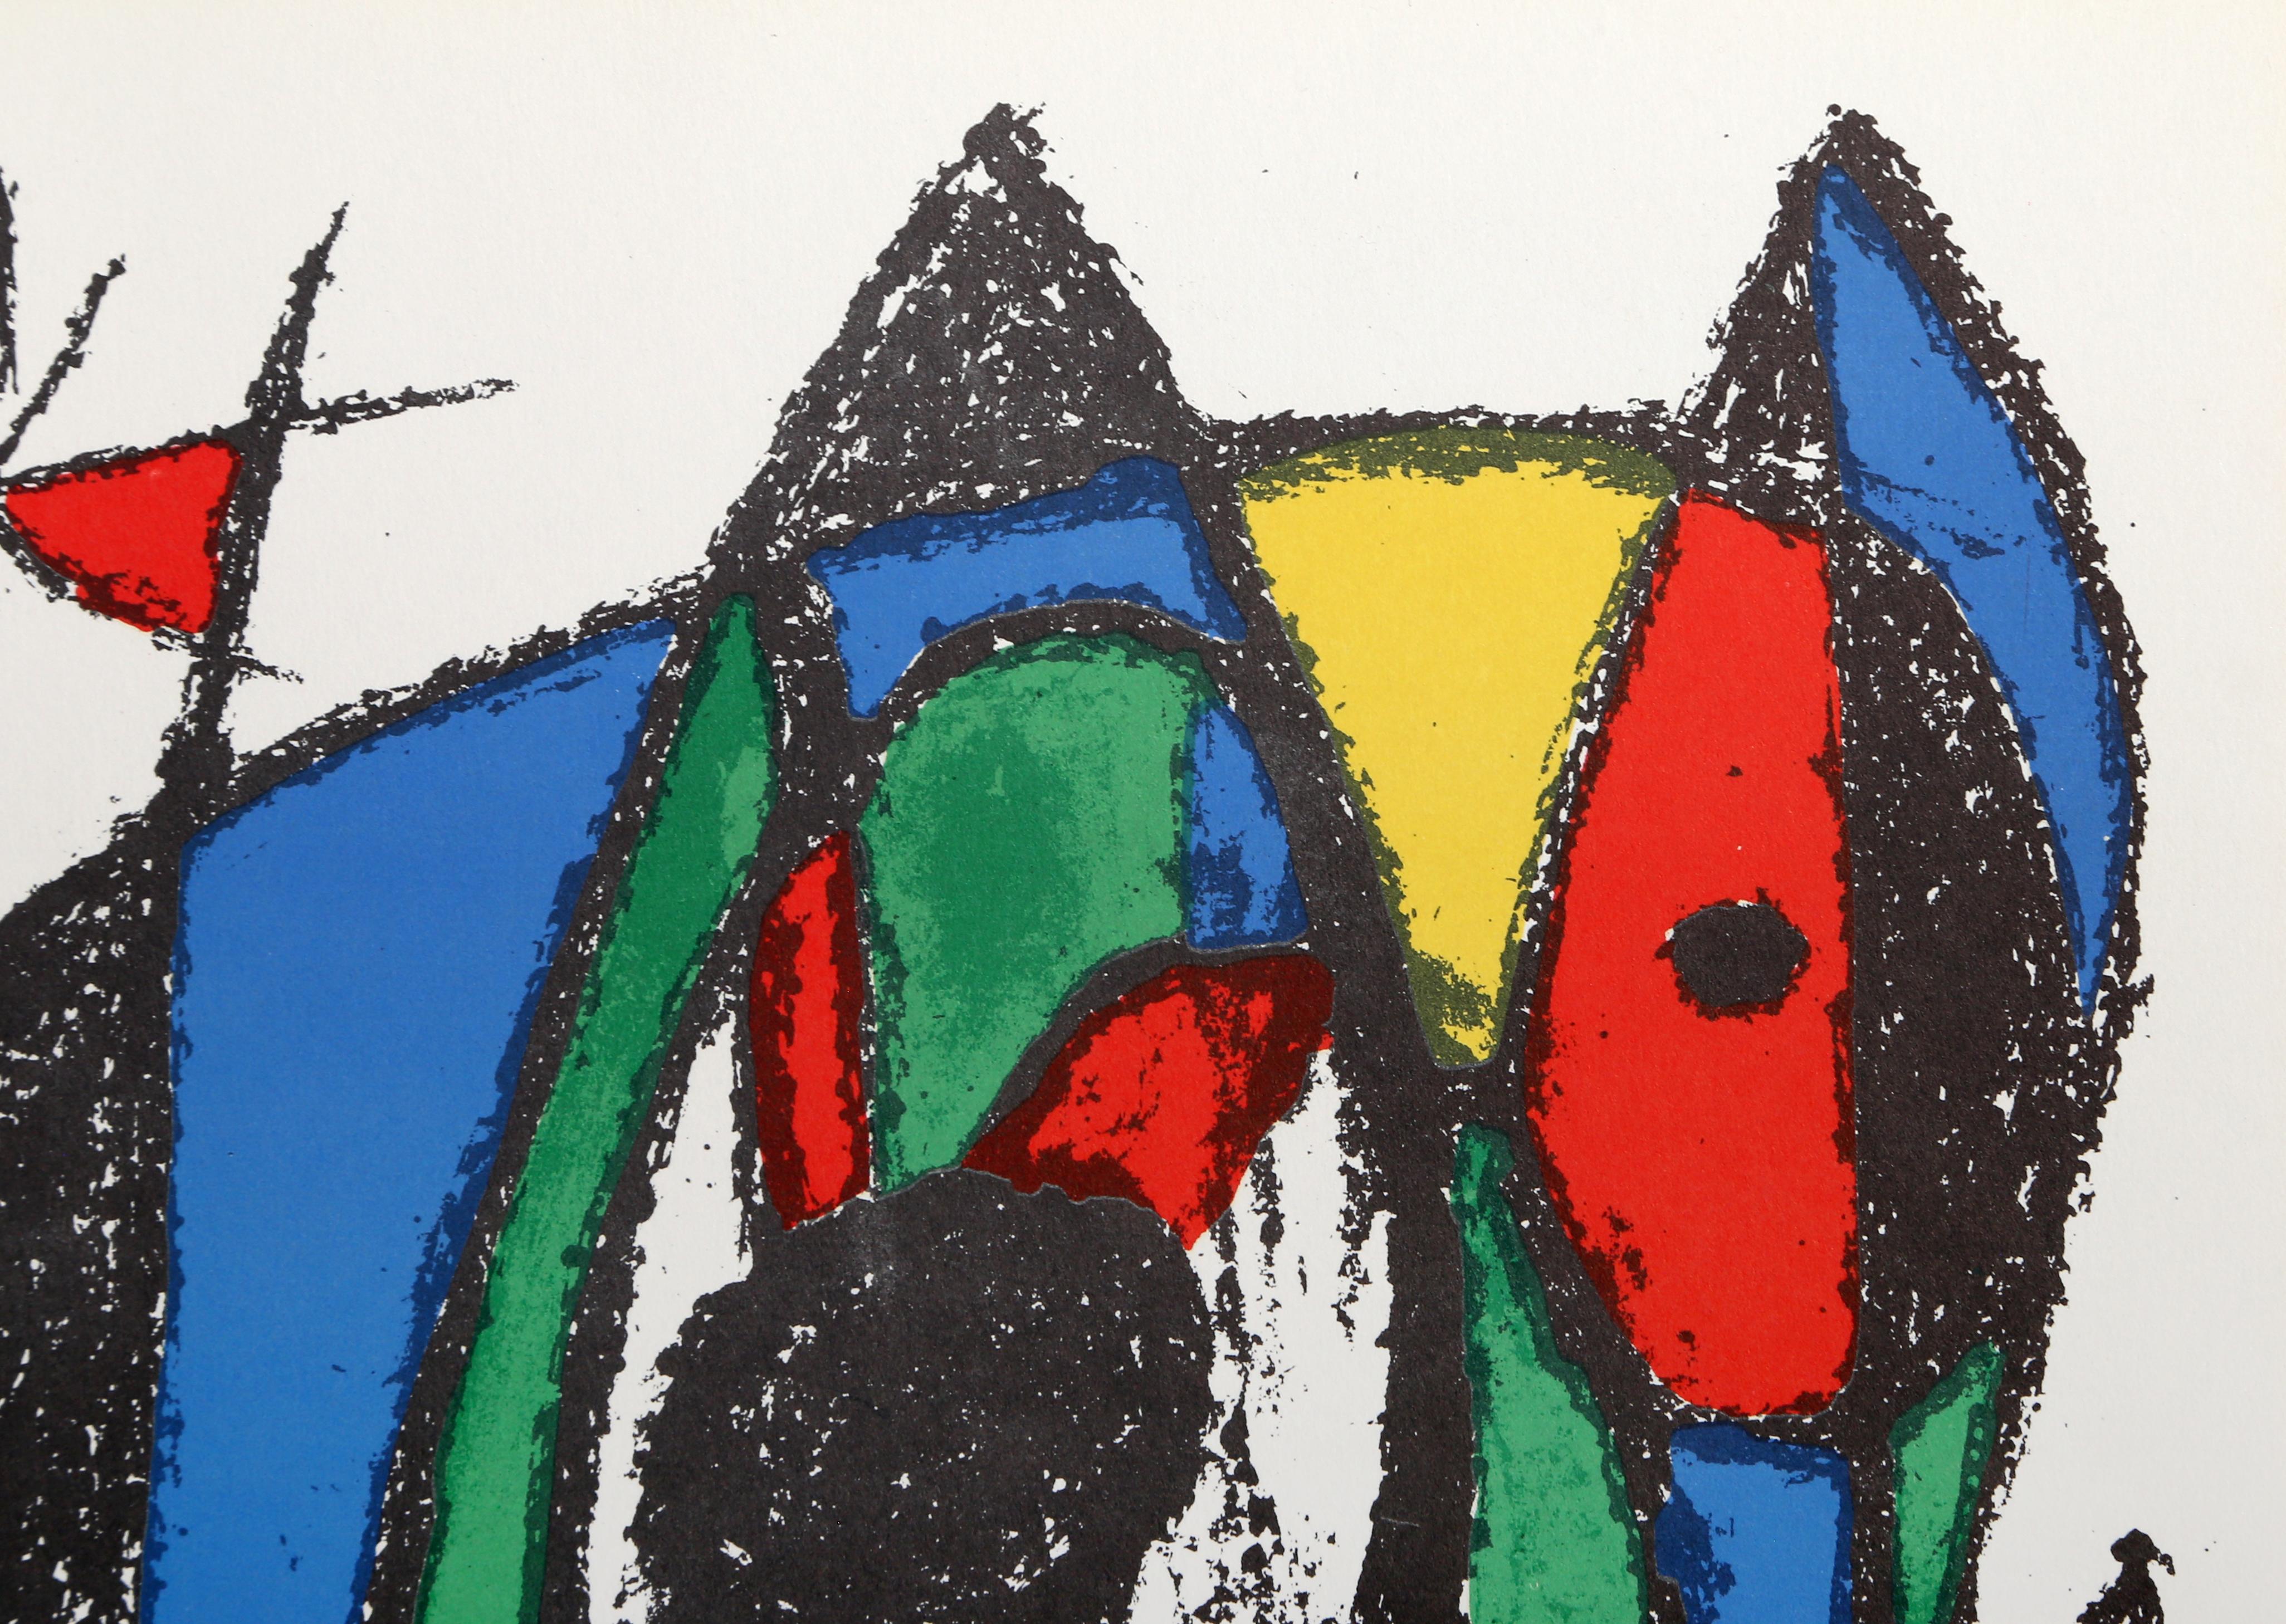 Joan Miro is known for his abstract, expressive, and child-like Modern style. Original lithograph published in Miro Lithographe II Catalogue Raisonne. Nicely framed.

Lithographs II (1041)
Joan Miro, Spanish (1893–1983)
Date: 1975
Lithograph
Size: